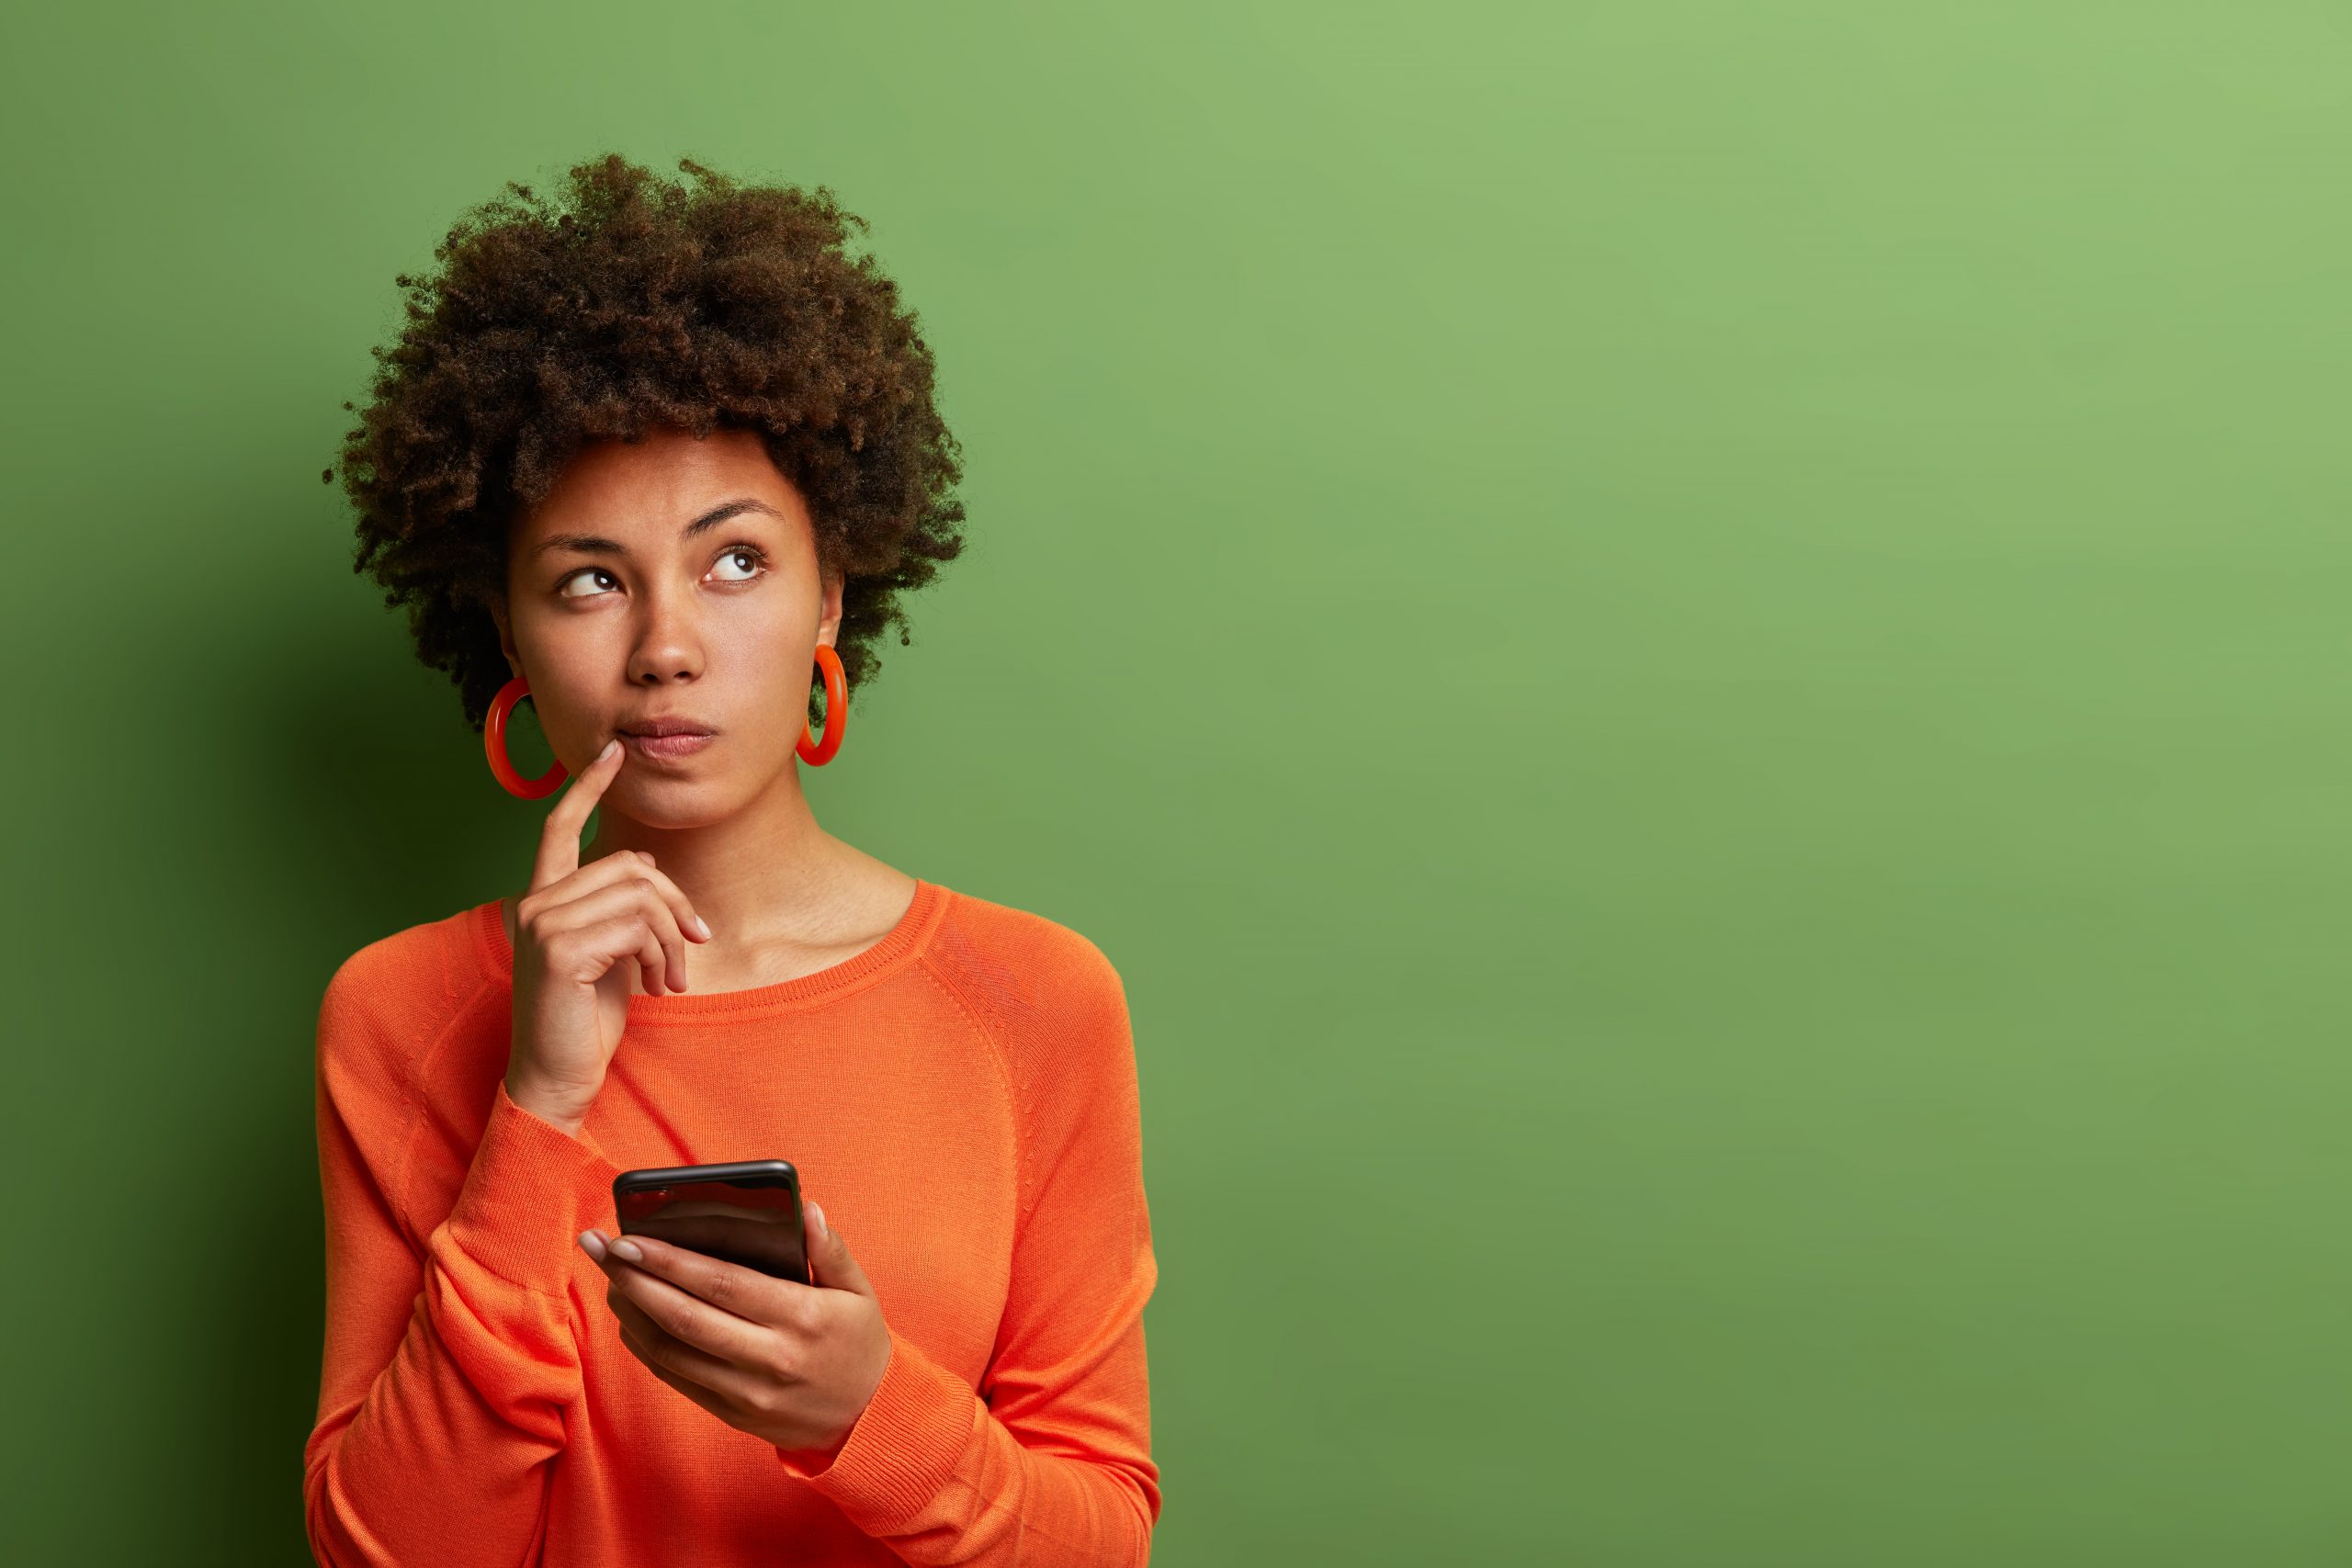 Woman thinking with phone in hand